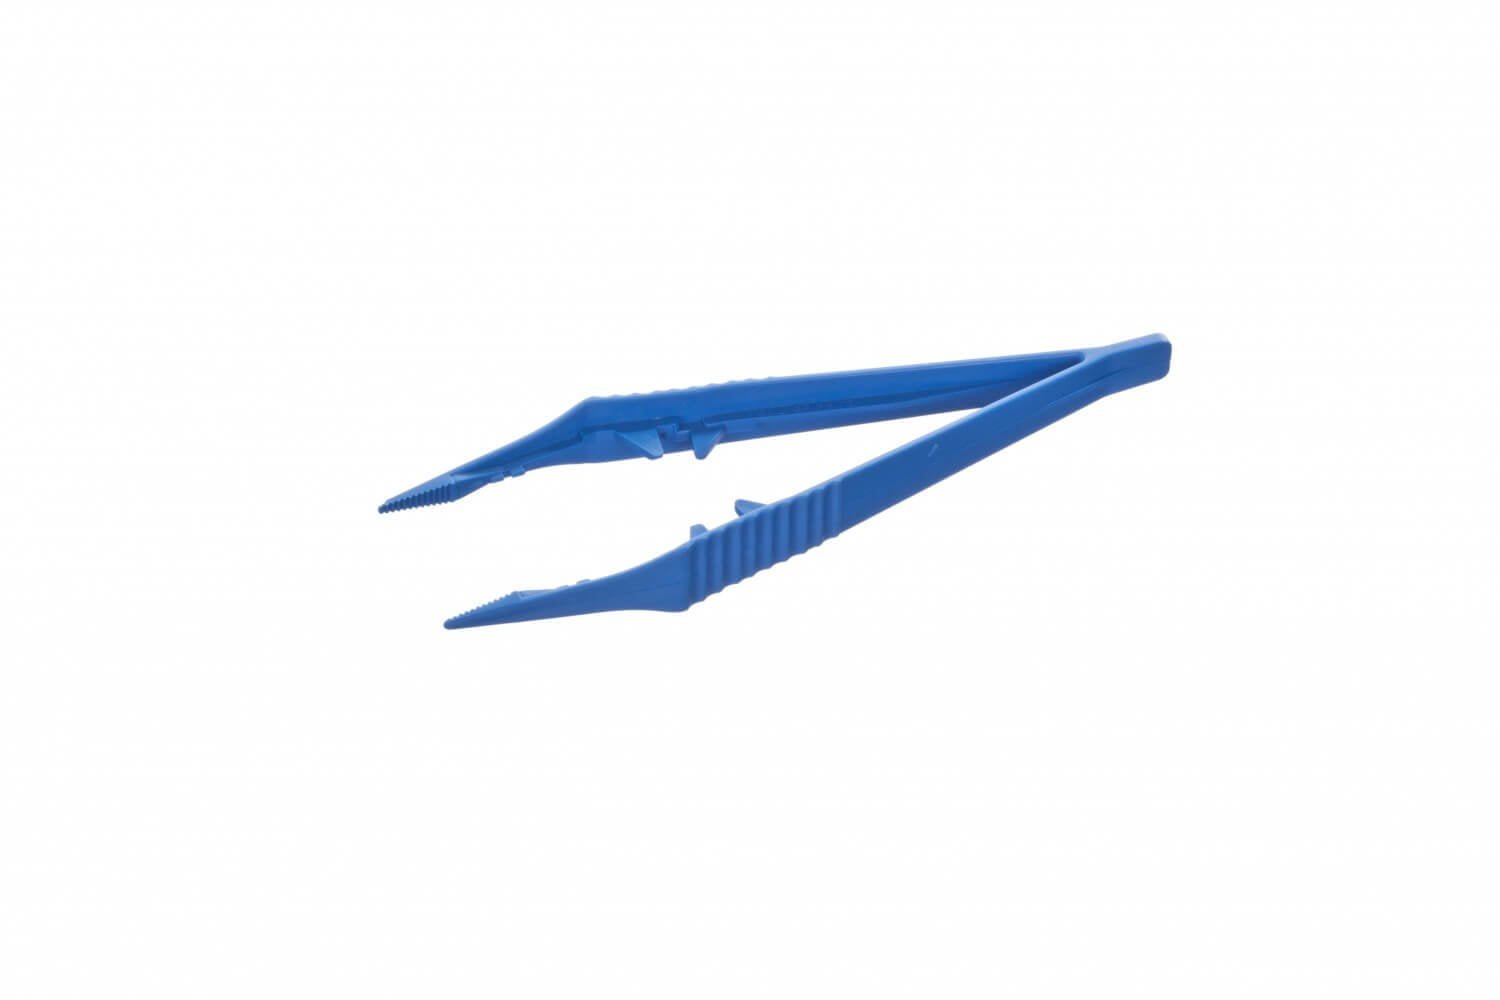 Disposable Forceps - Medipost - Packs of 100 or cases of 400